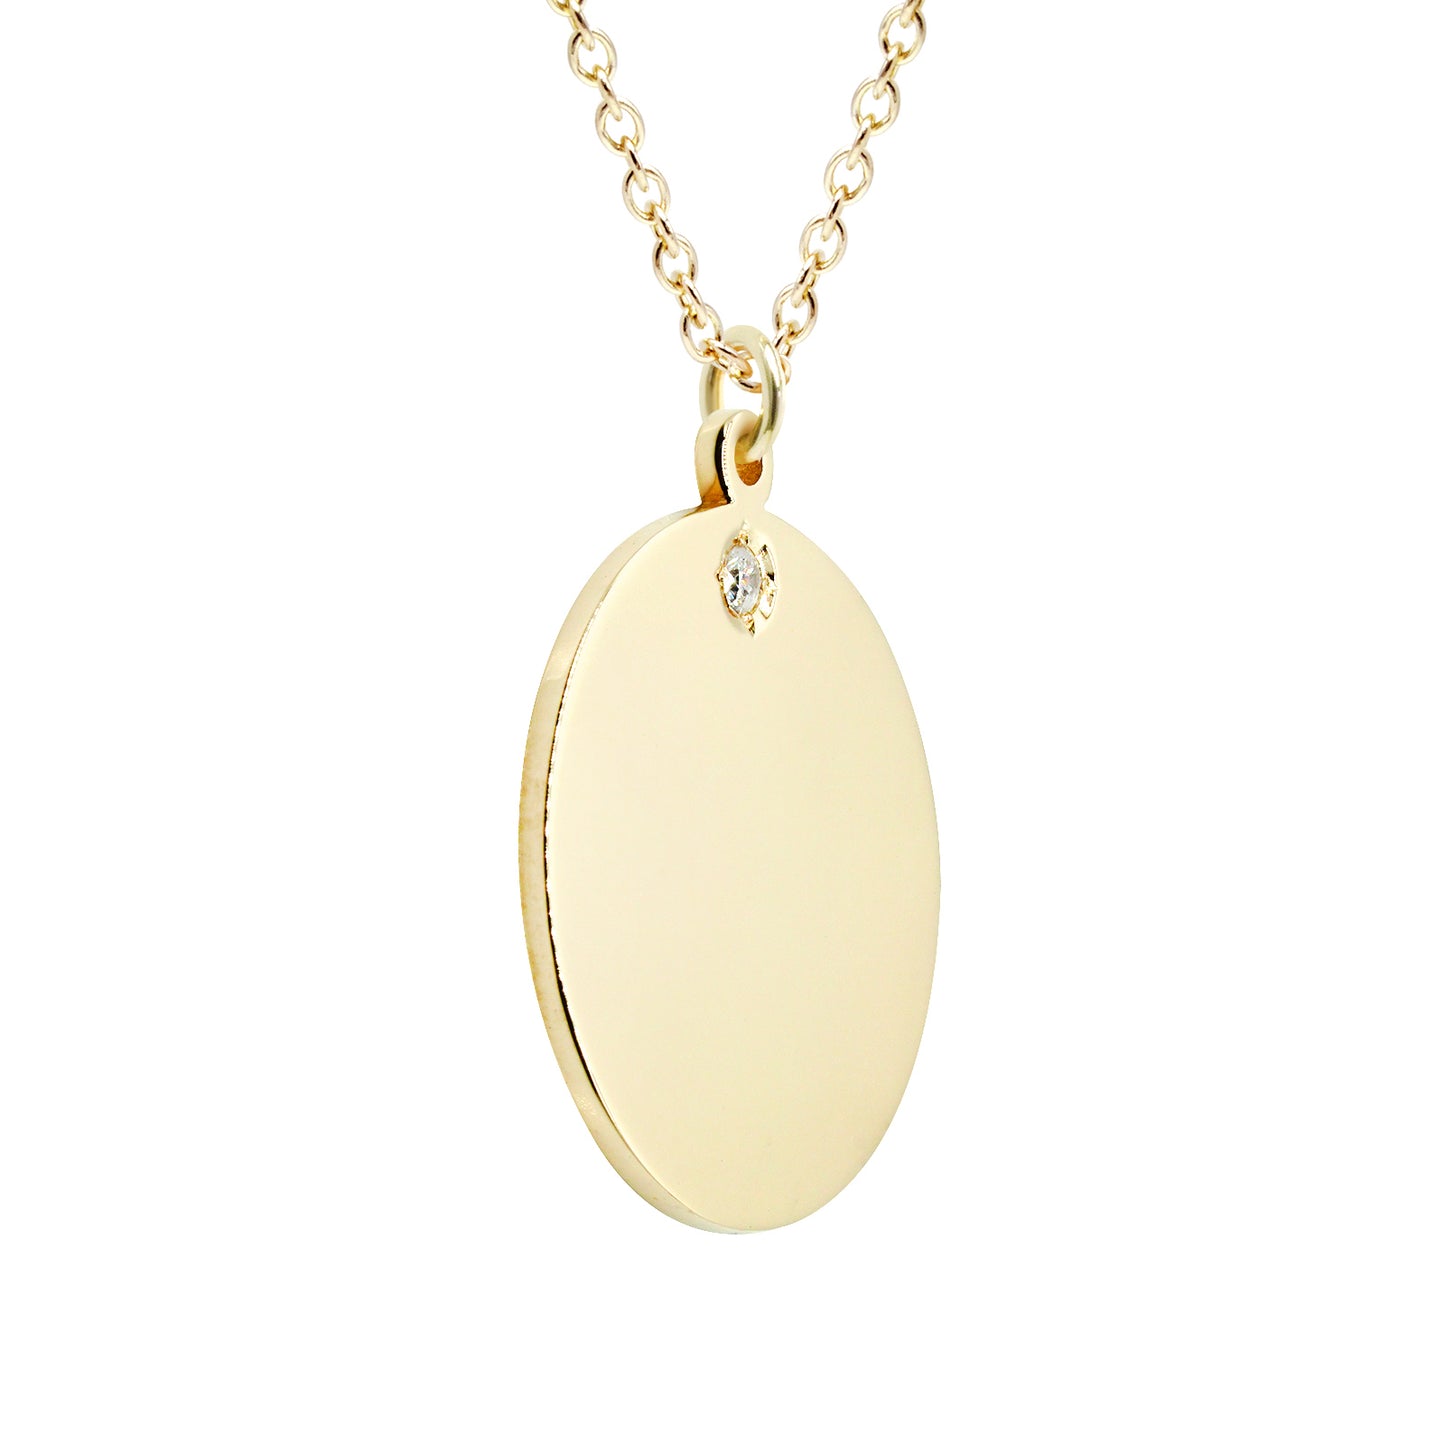 High Polish 14K Gold Engravable Disk with Accent Diamond